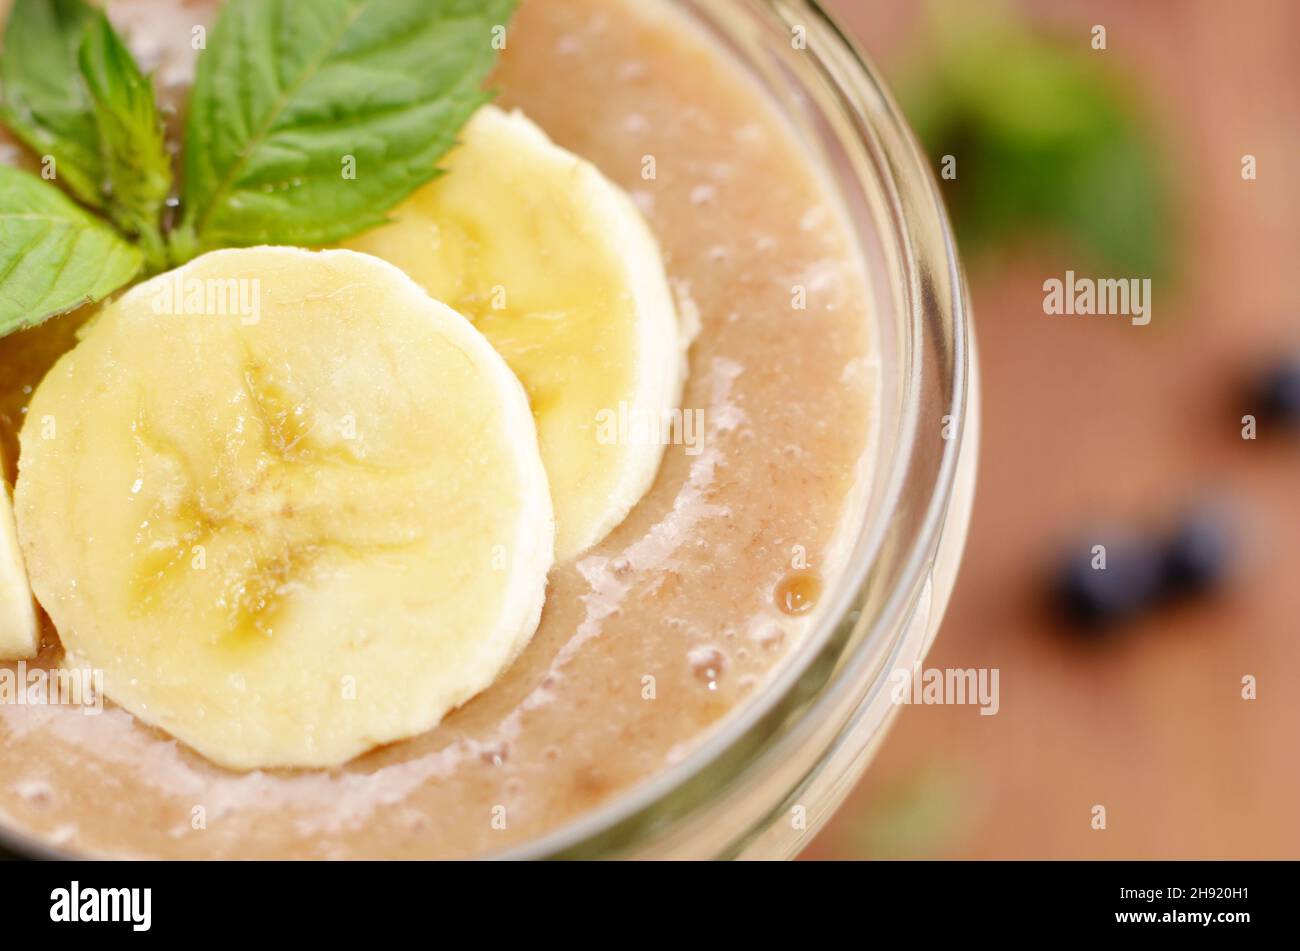 Banana smoothie on wooden table Stock Photo